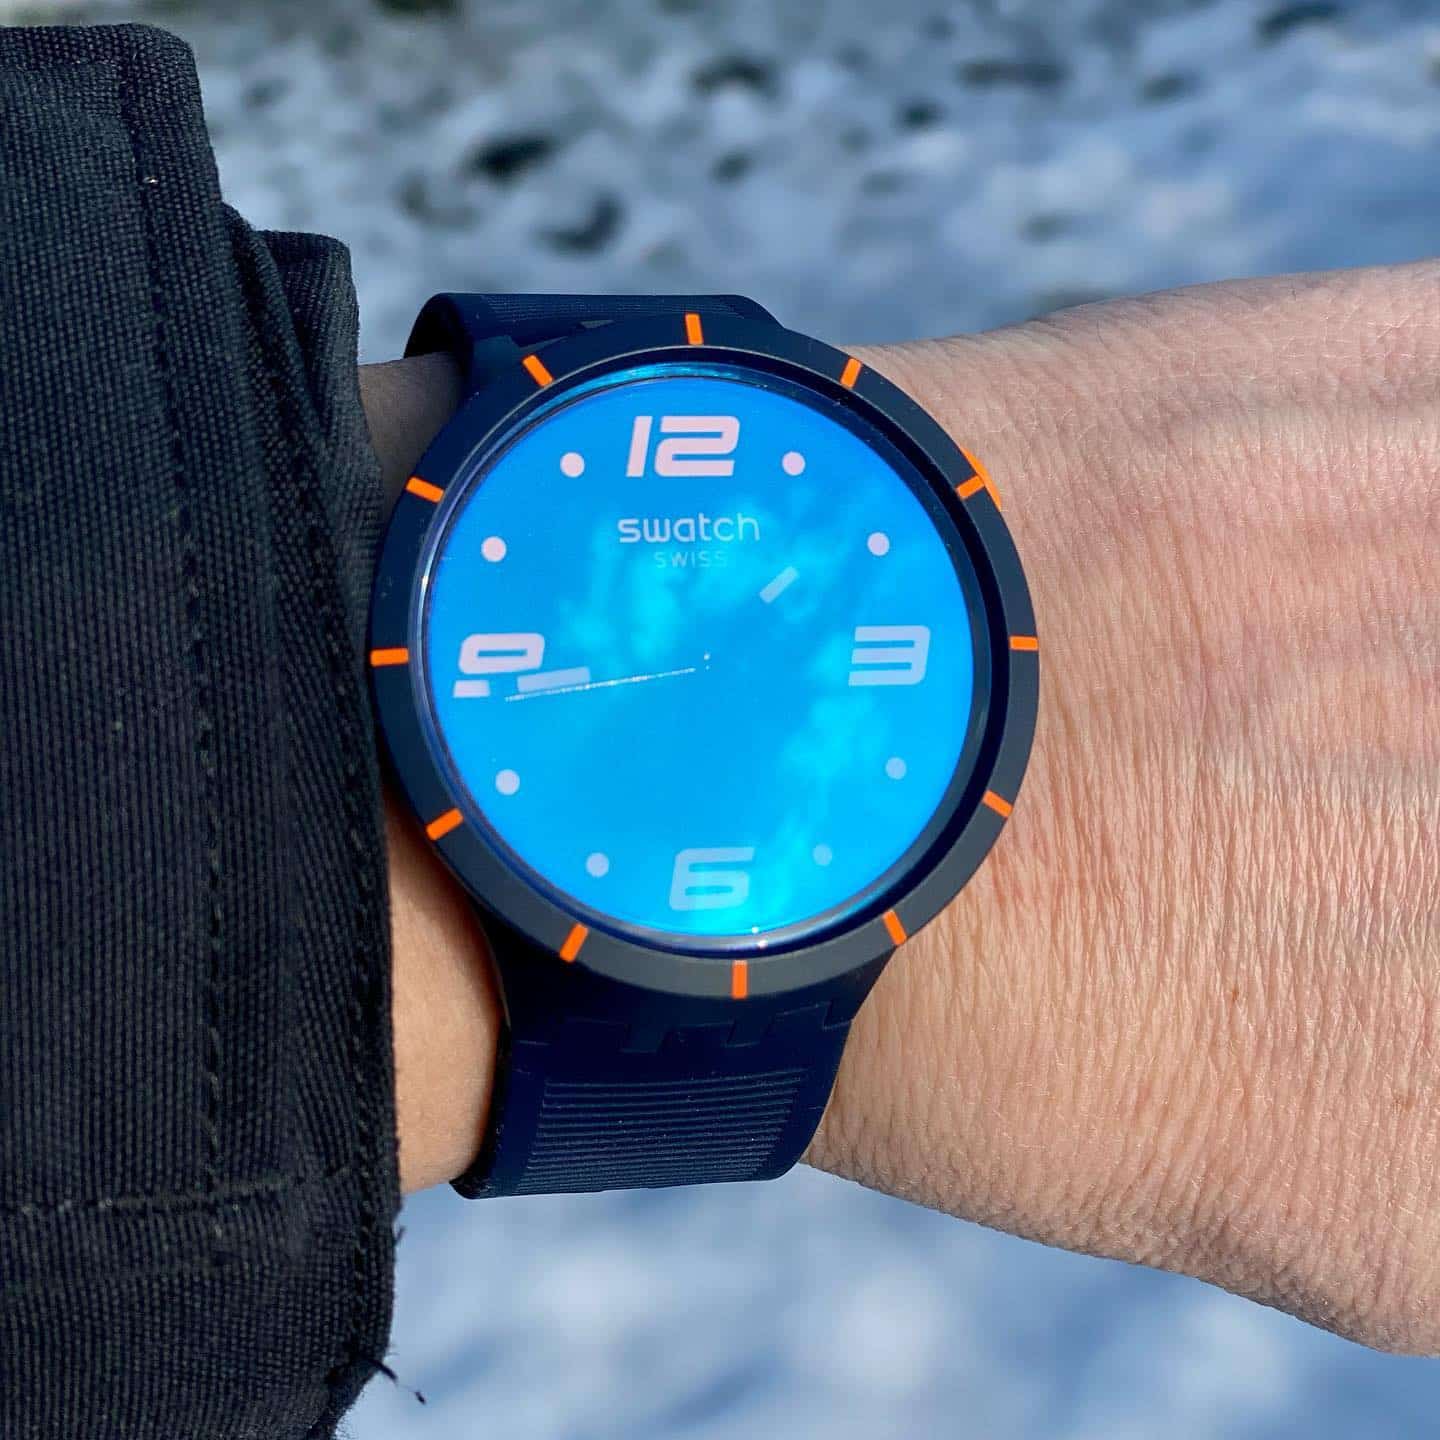 Time for a little walk in the snow @swatch @swatchclub